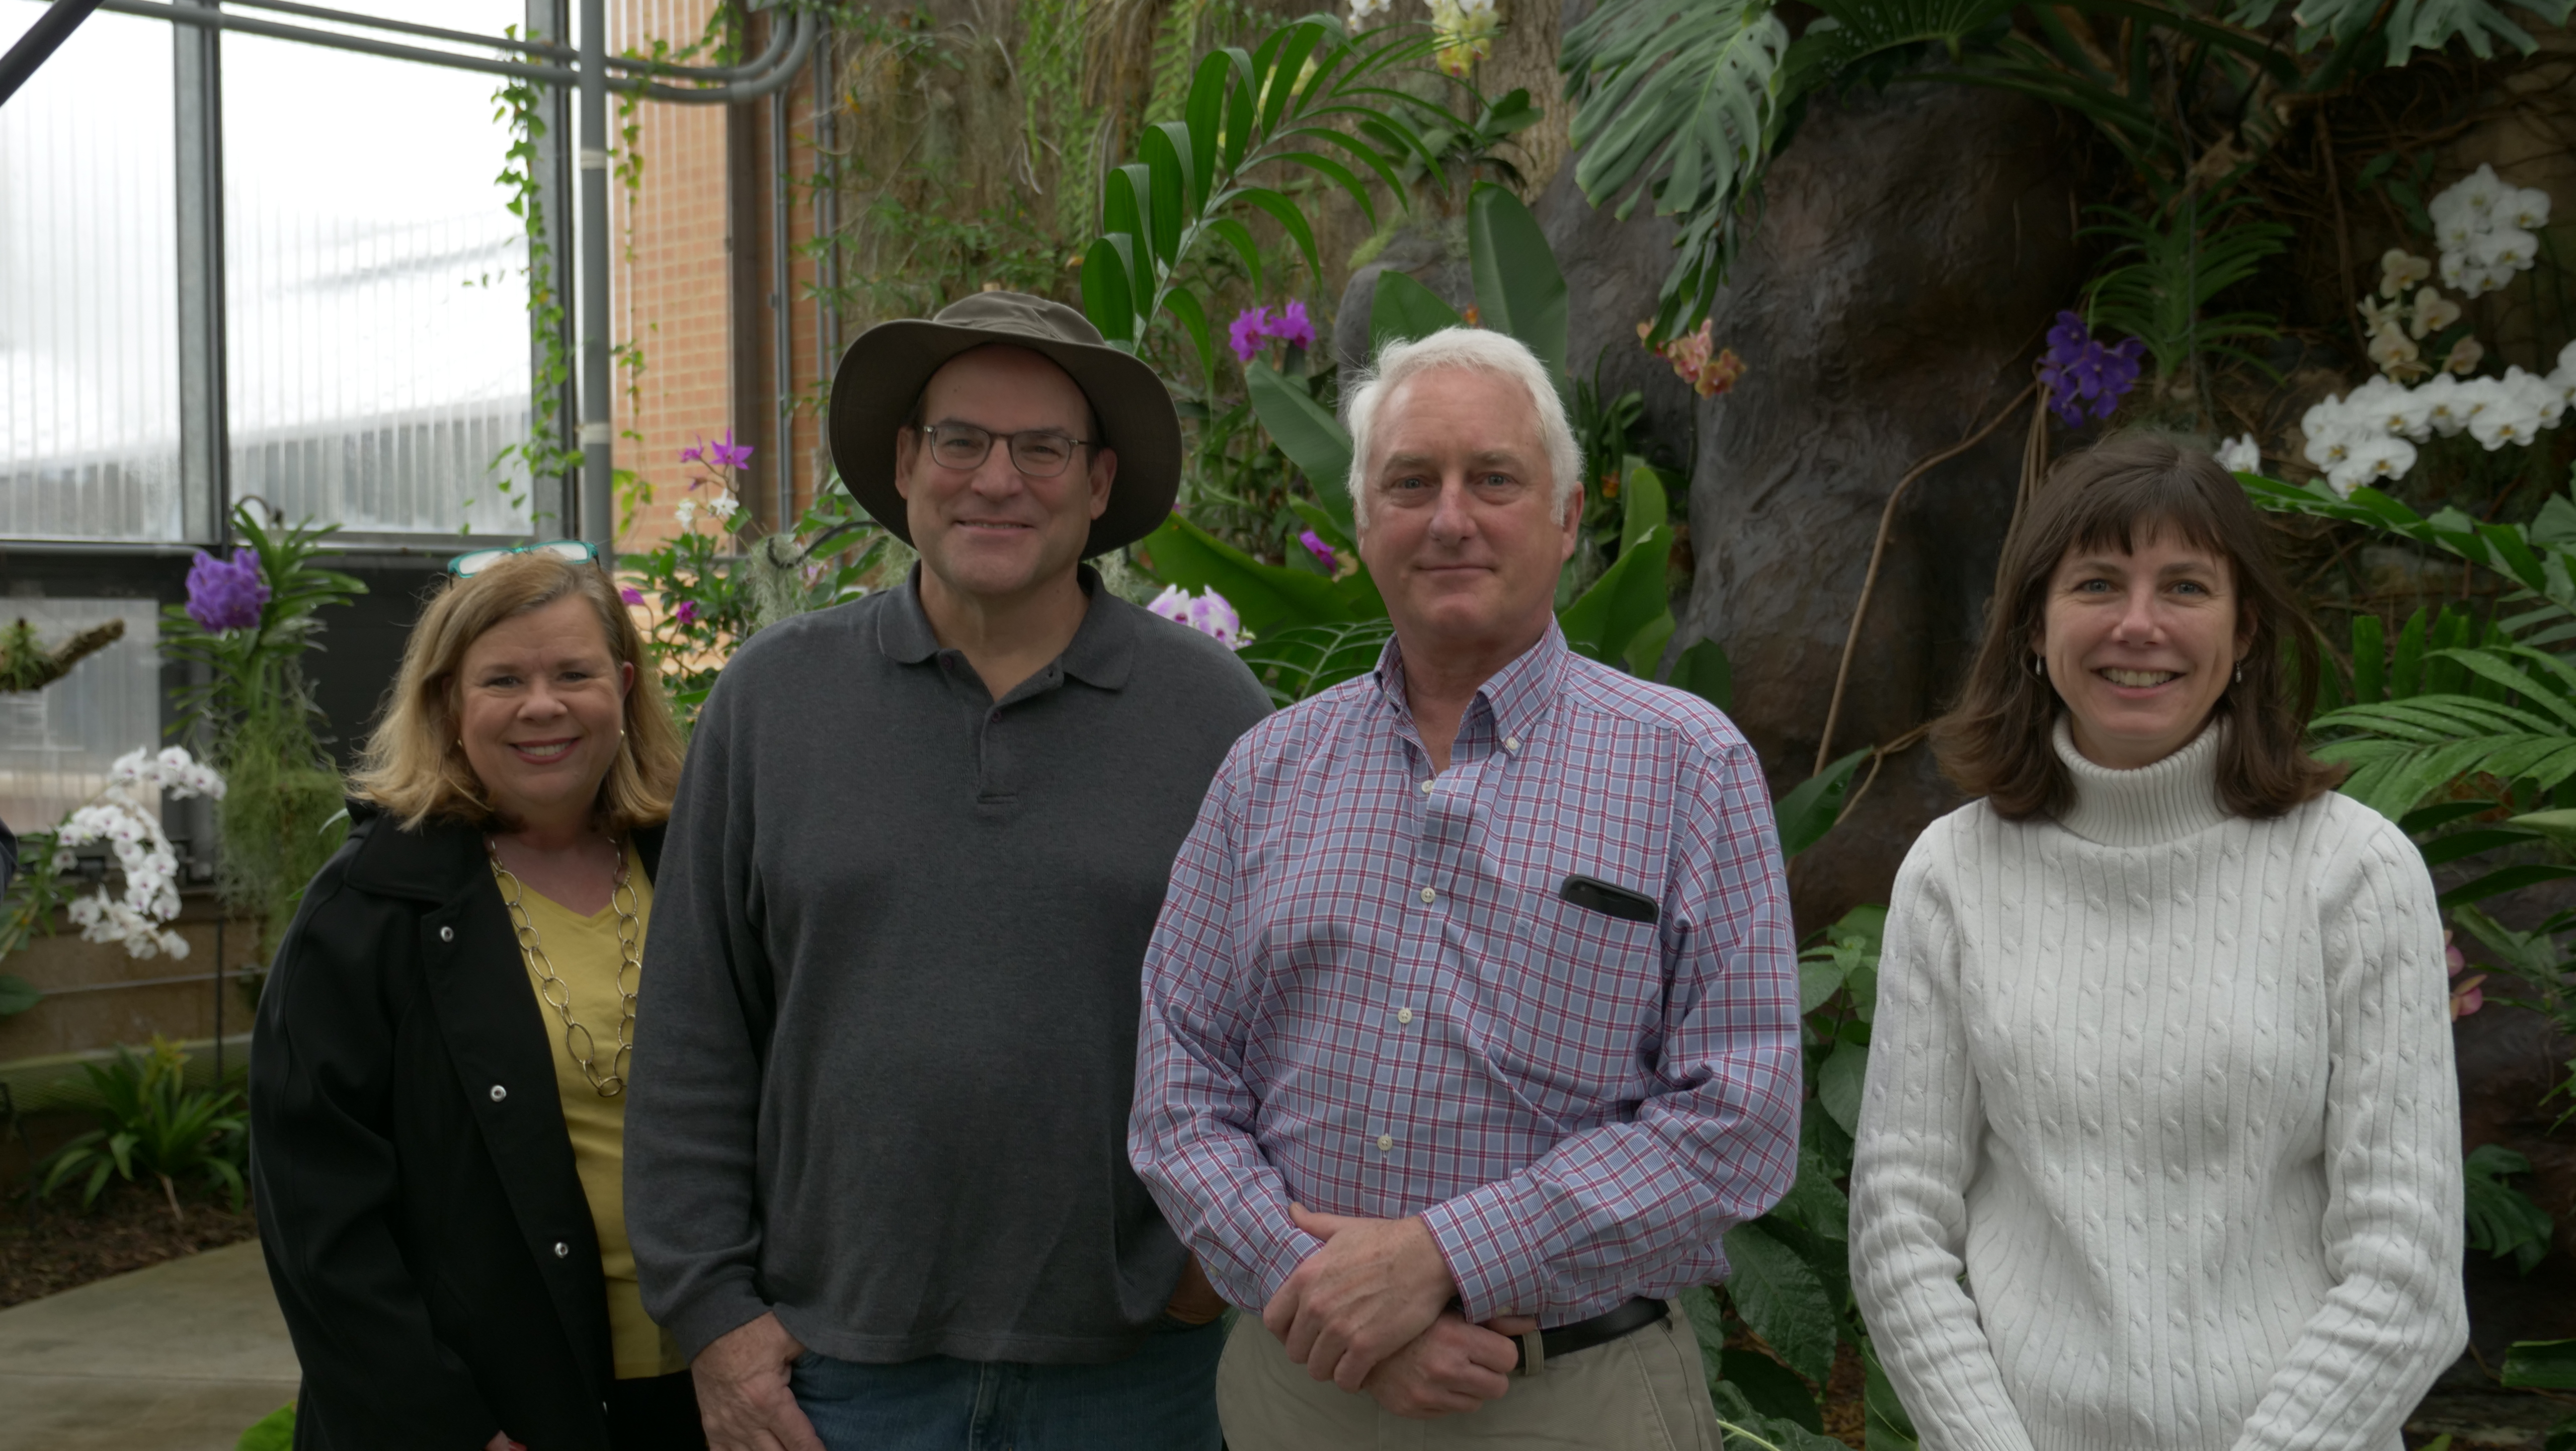 Kaplan Orchid Conservatory Featured on WHRO's HearSay with Cathy Lewis